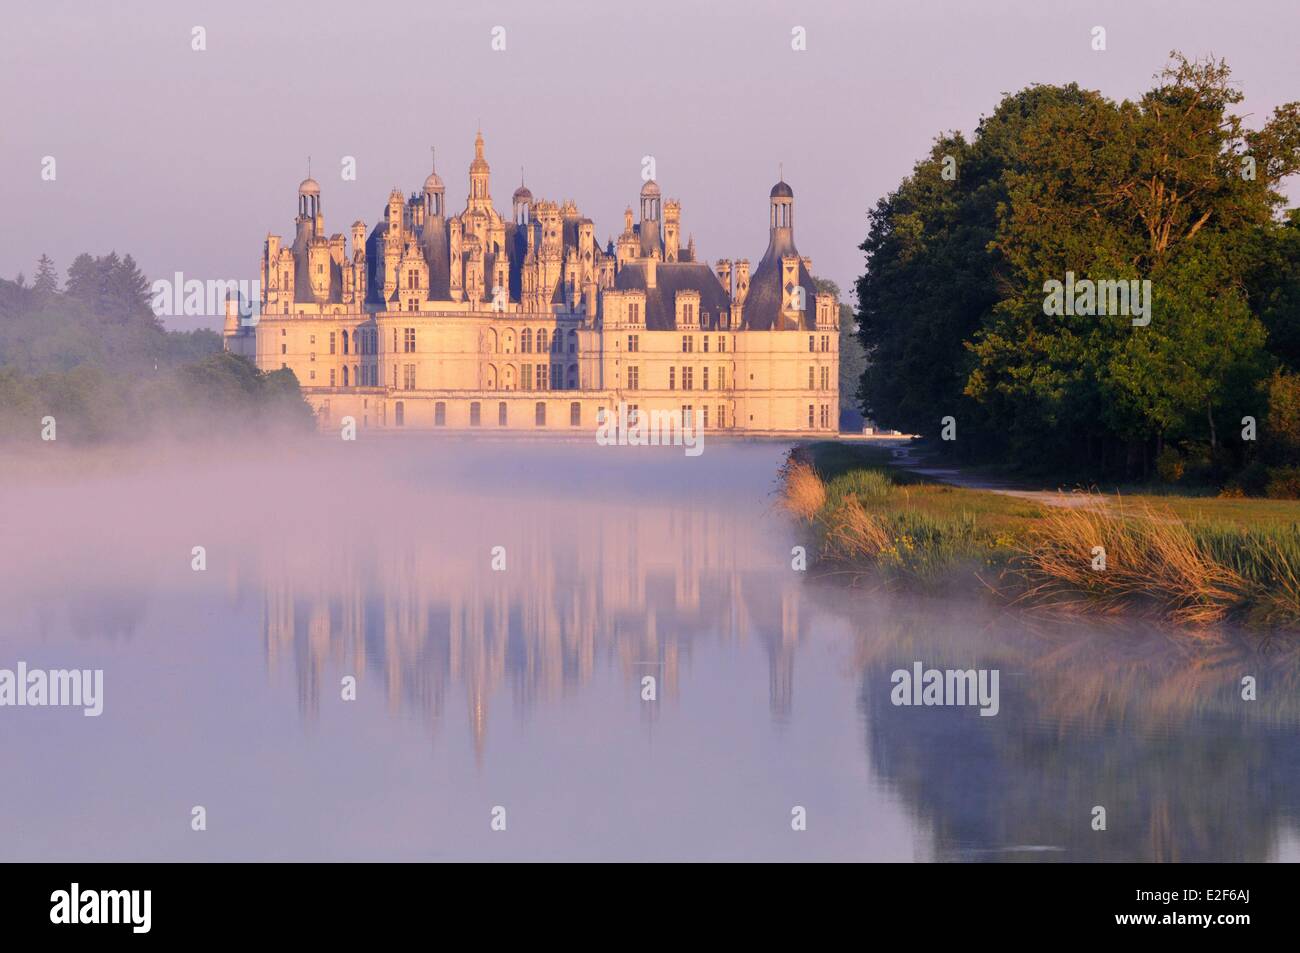 France Loir et Cher Loire Valley Chambord Chateau de Chambord listed as World Heritage by UNESCO built in 16th century in Stock Photo